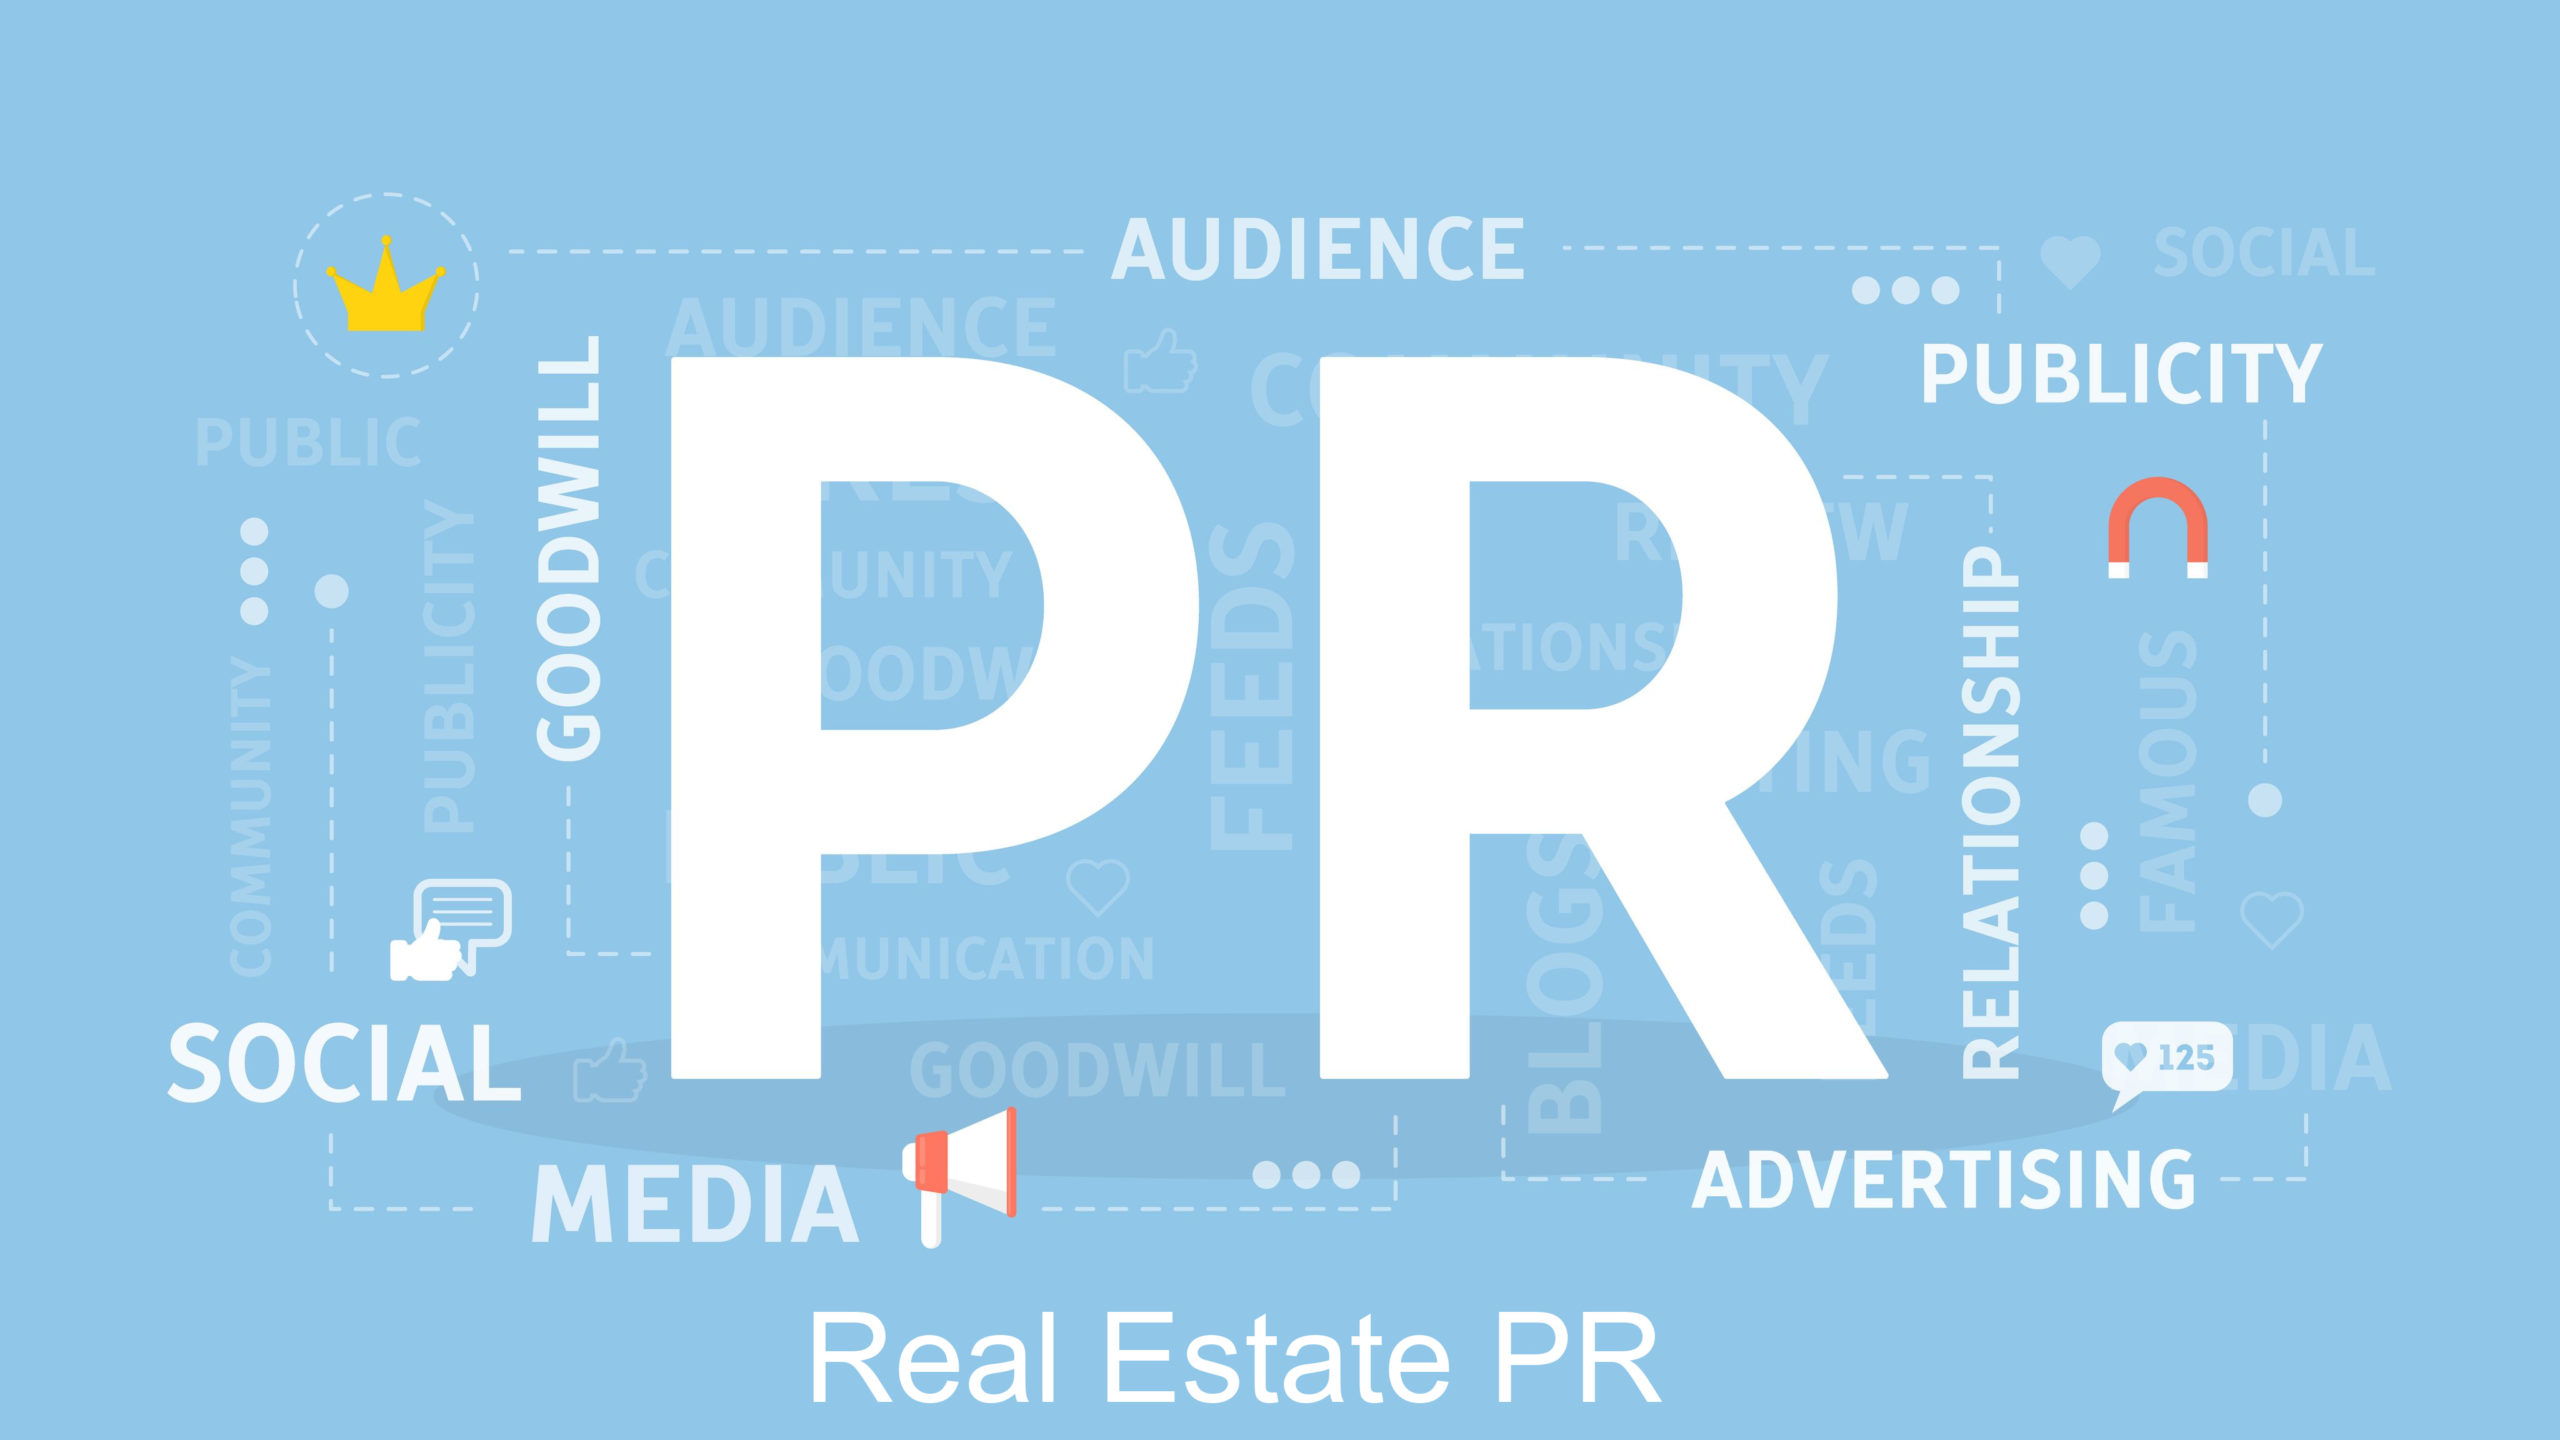 How to Integrate Your Real Estate PR Into Your Social Media Strategy